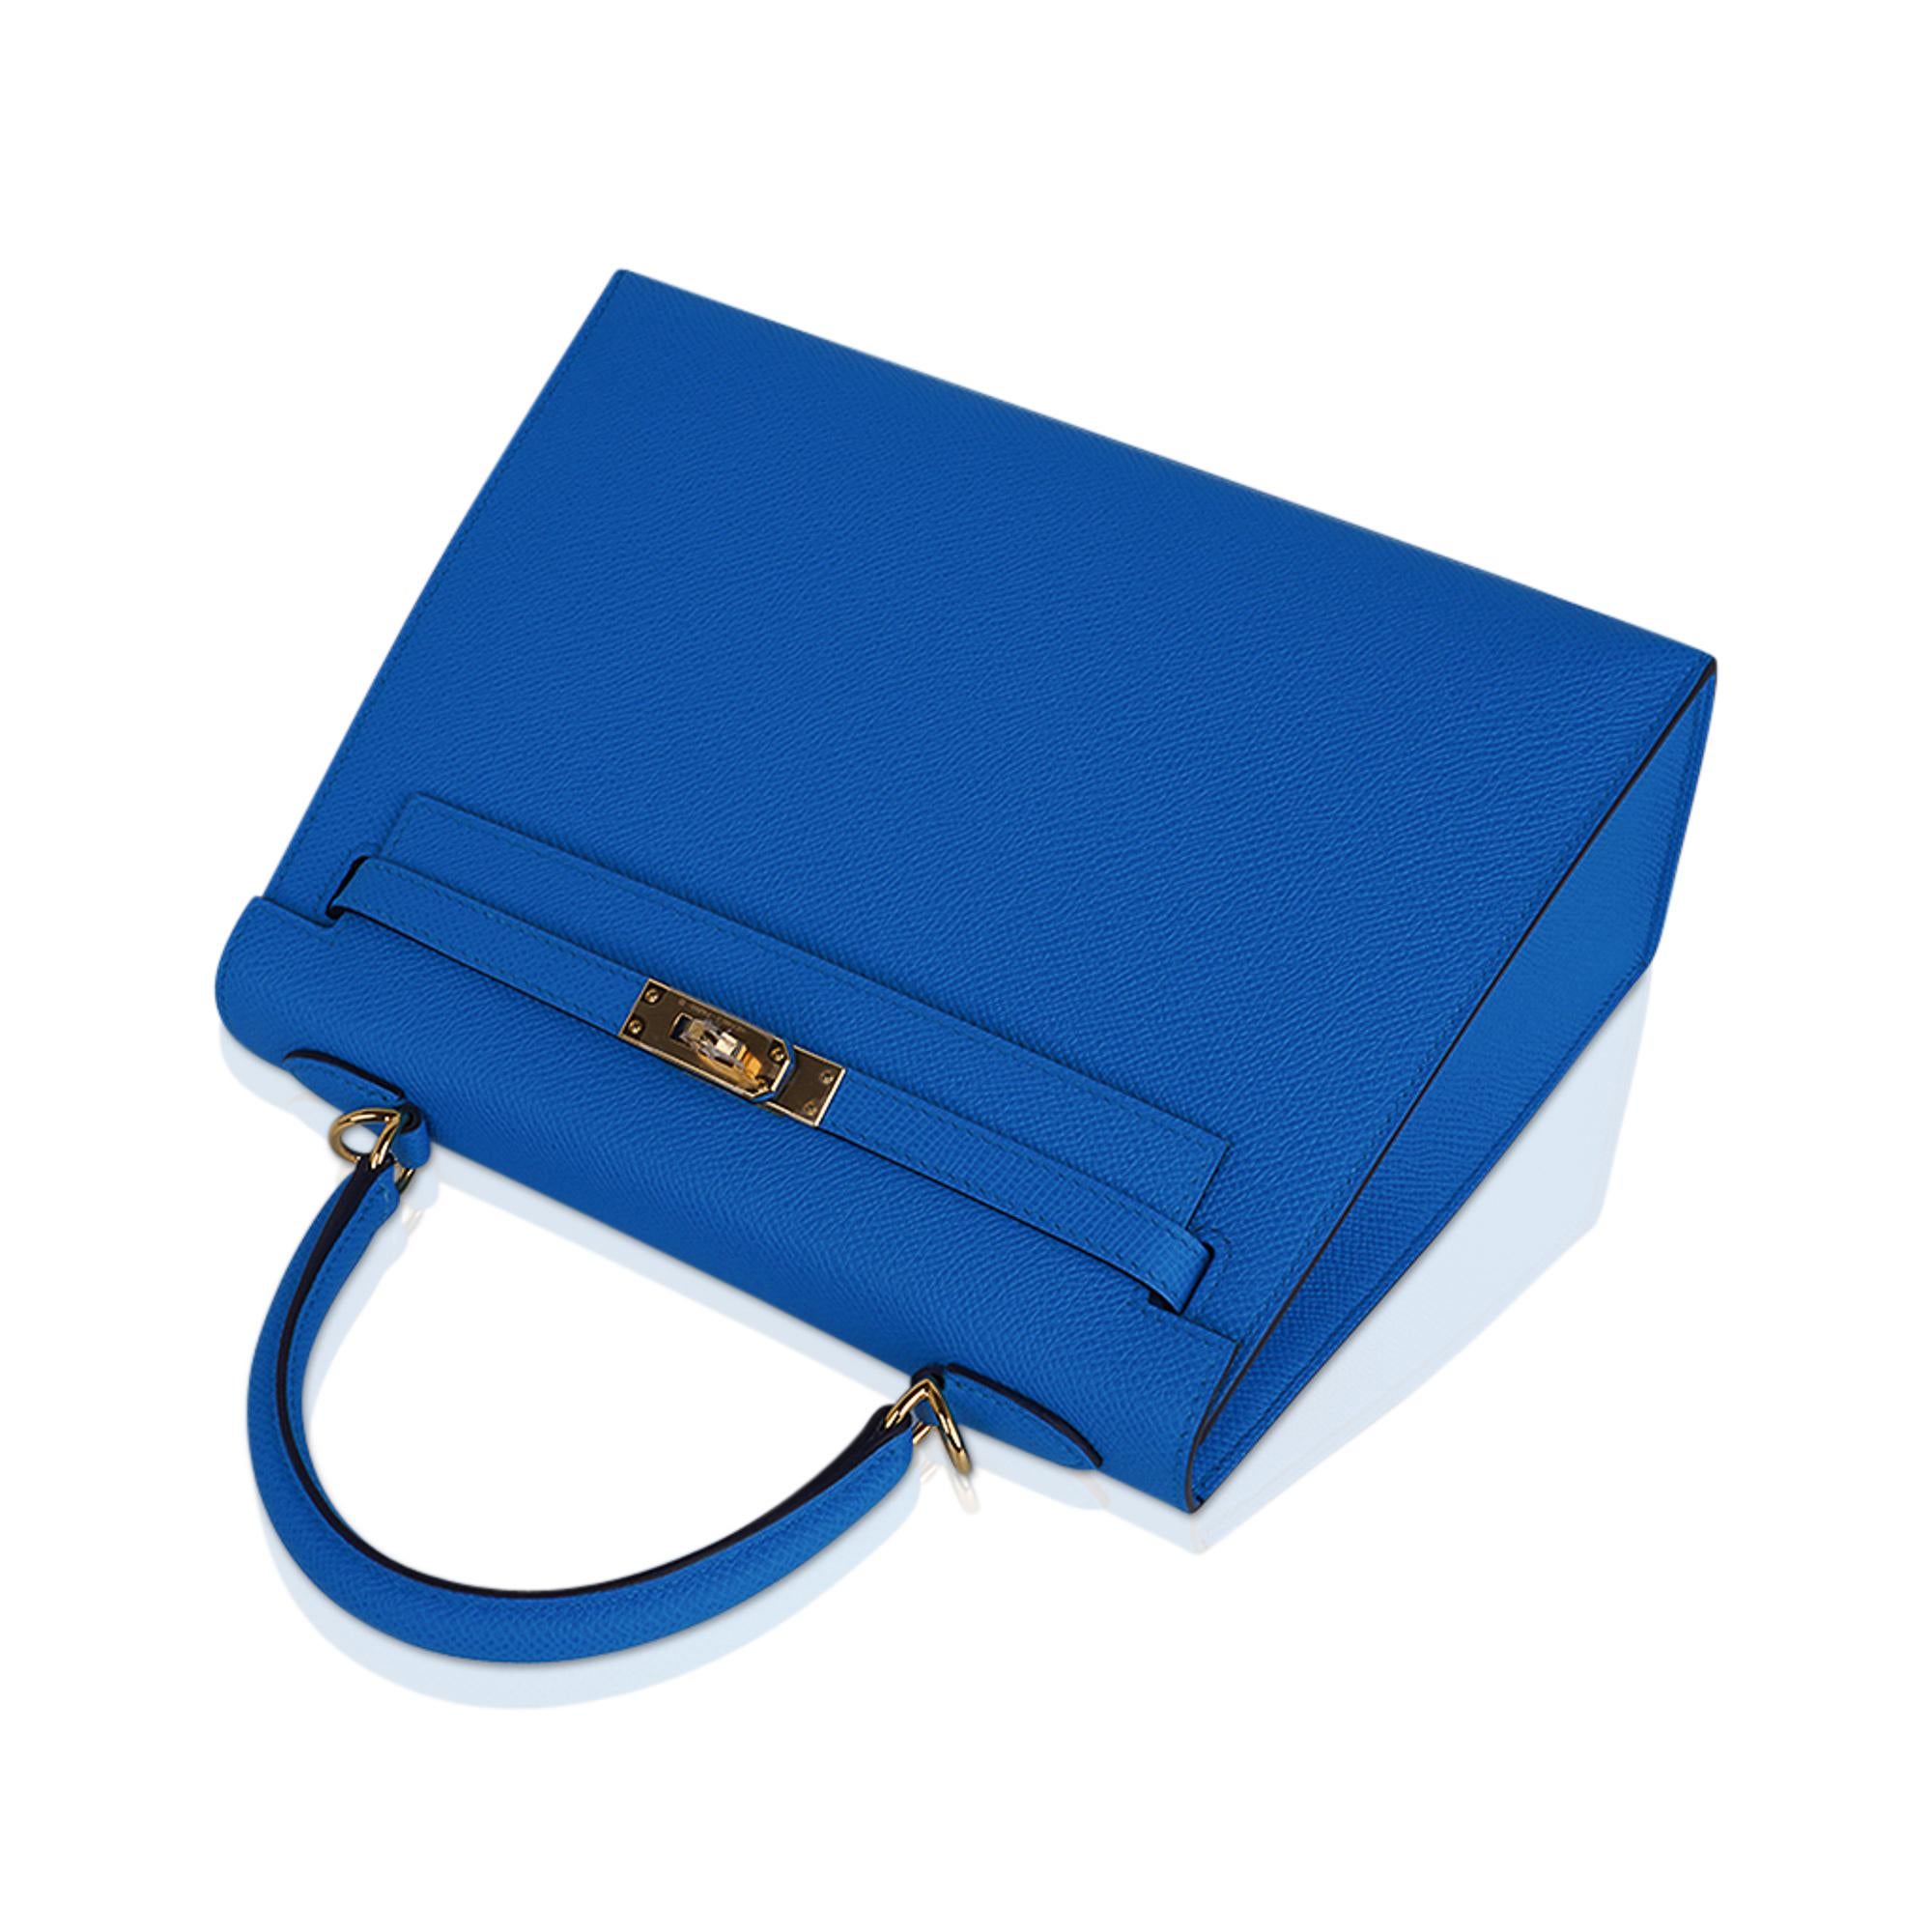 Hermes Kelly Sellier 25 Blue Frida Bag Gold Hardware Epsom Leather In New Condition For Sale In Miami, FL